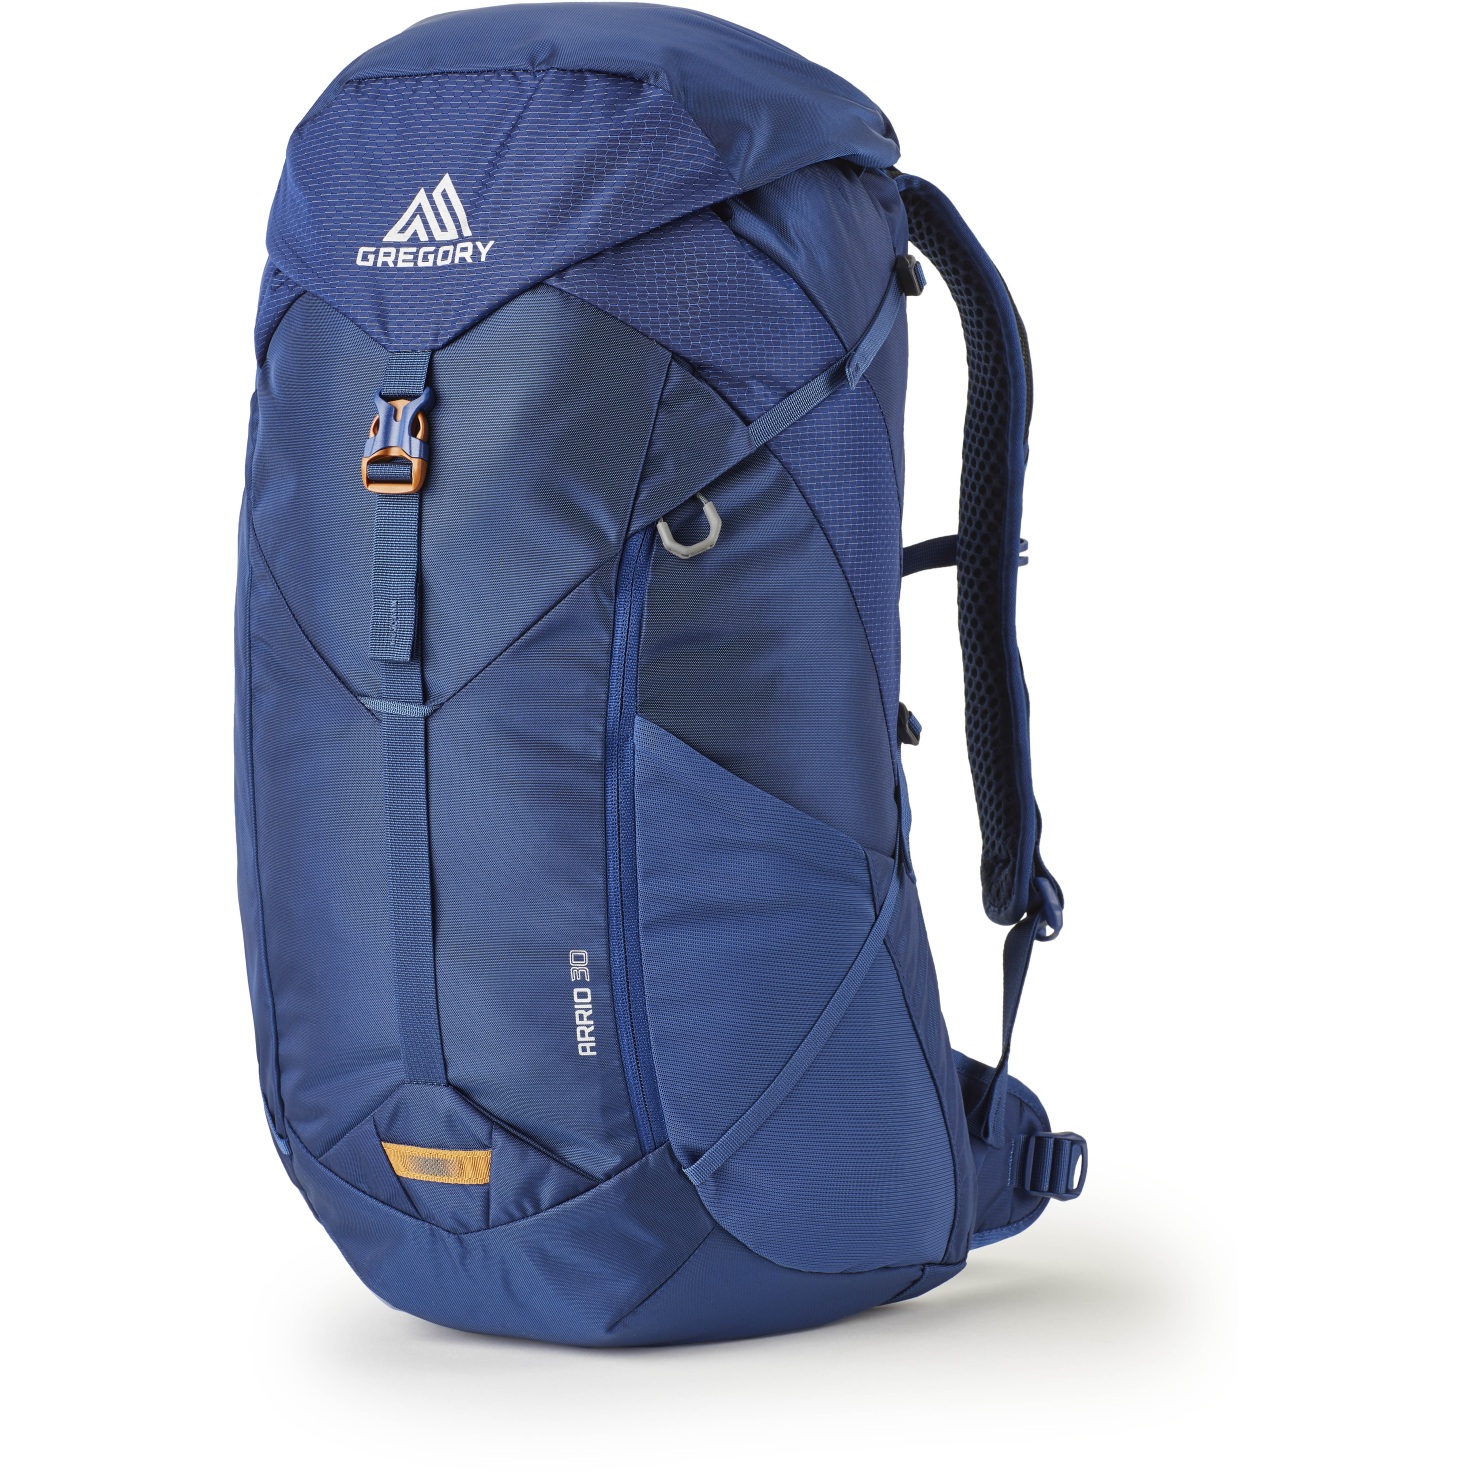 Image of Gregory Arrio 30 Backpack - Empire Blue